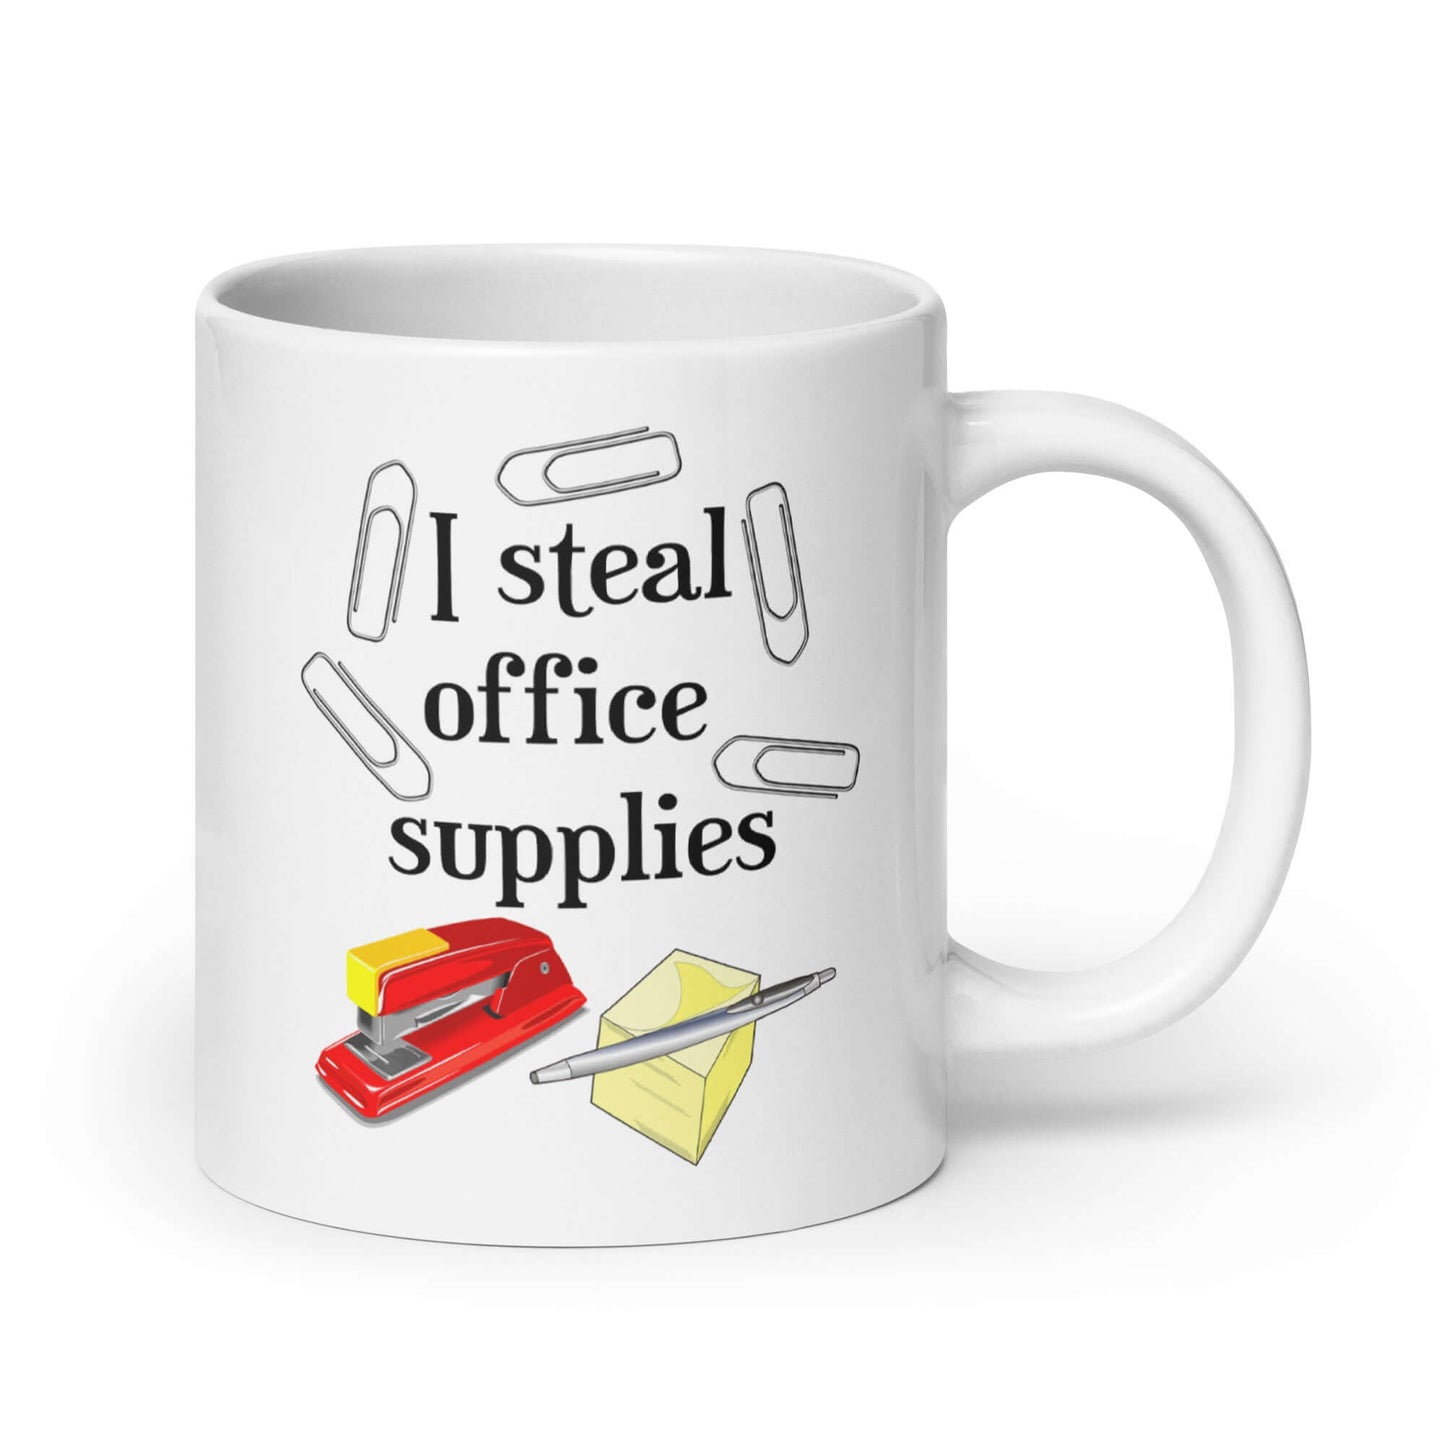 I steal office supplies funny mug for work